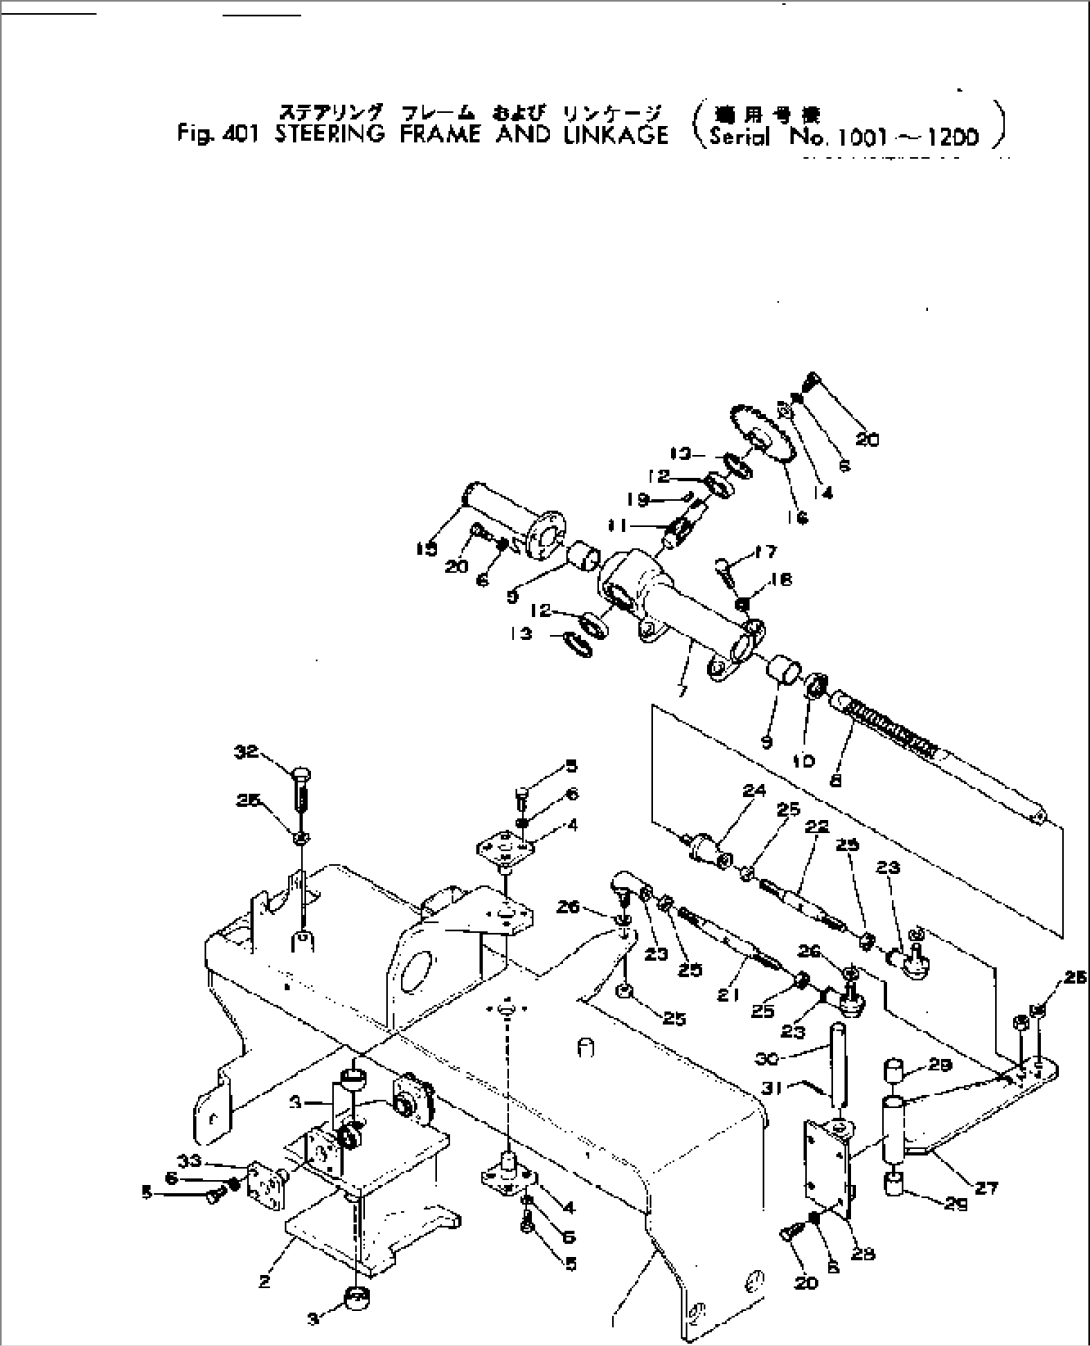 STEERING FRAME AND LINKAGE(#1001-1200)